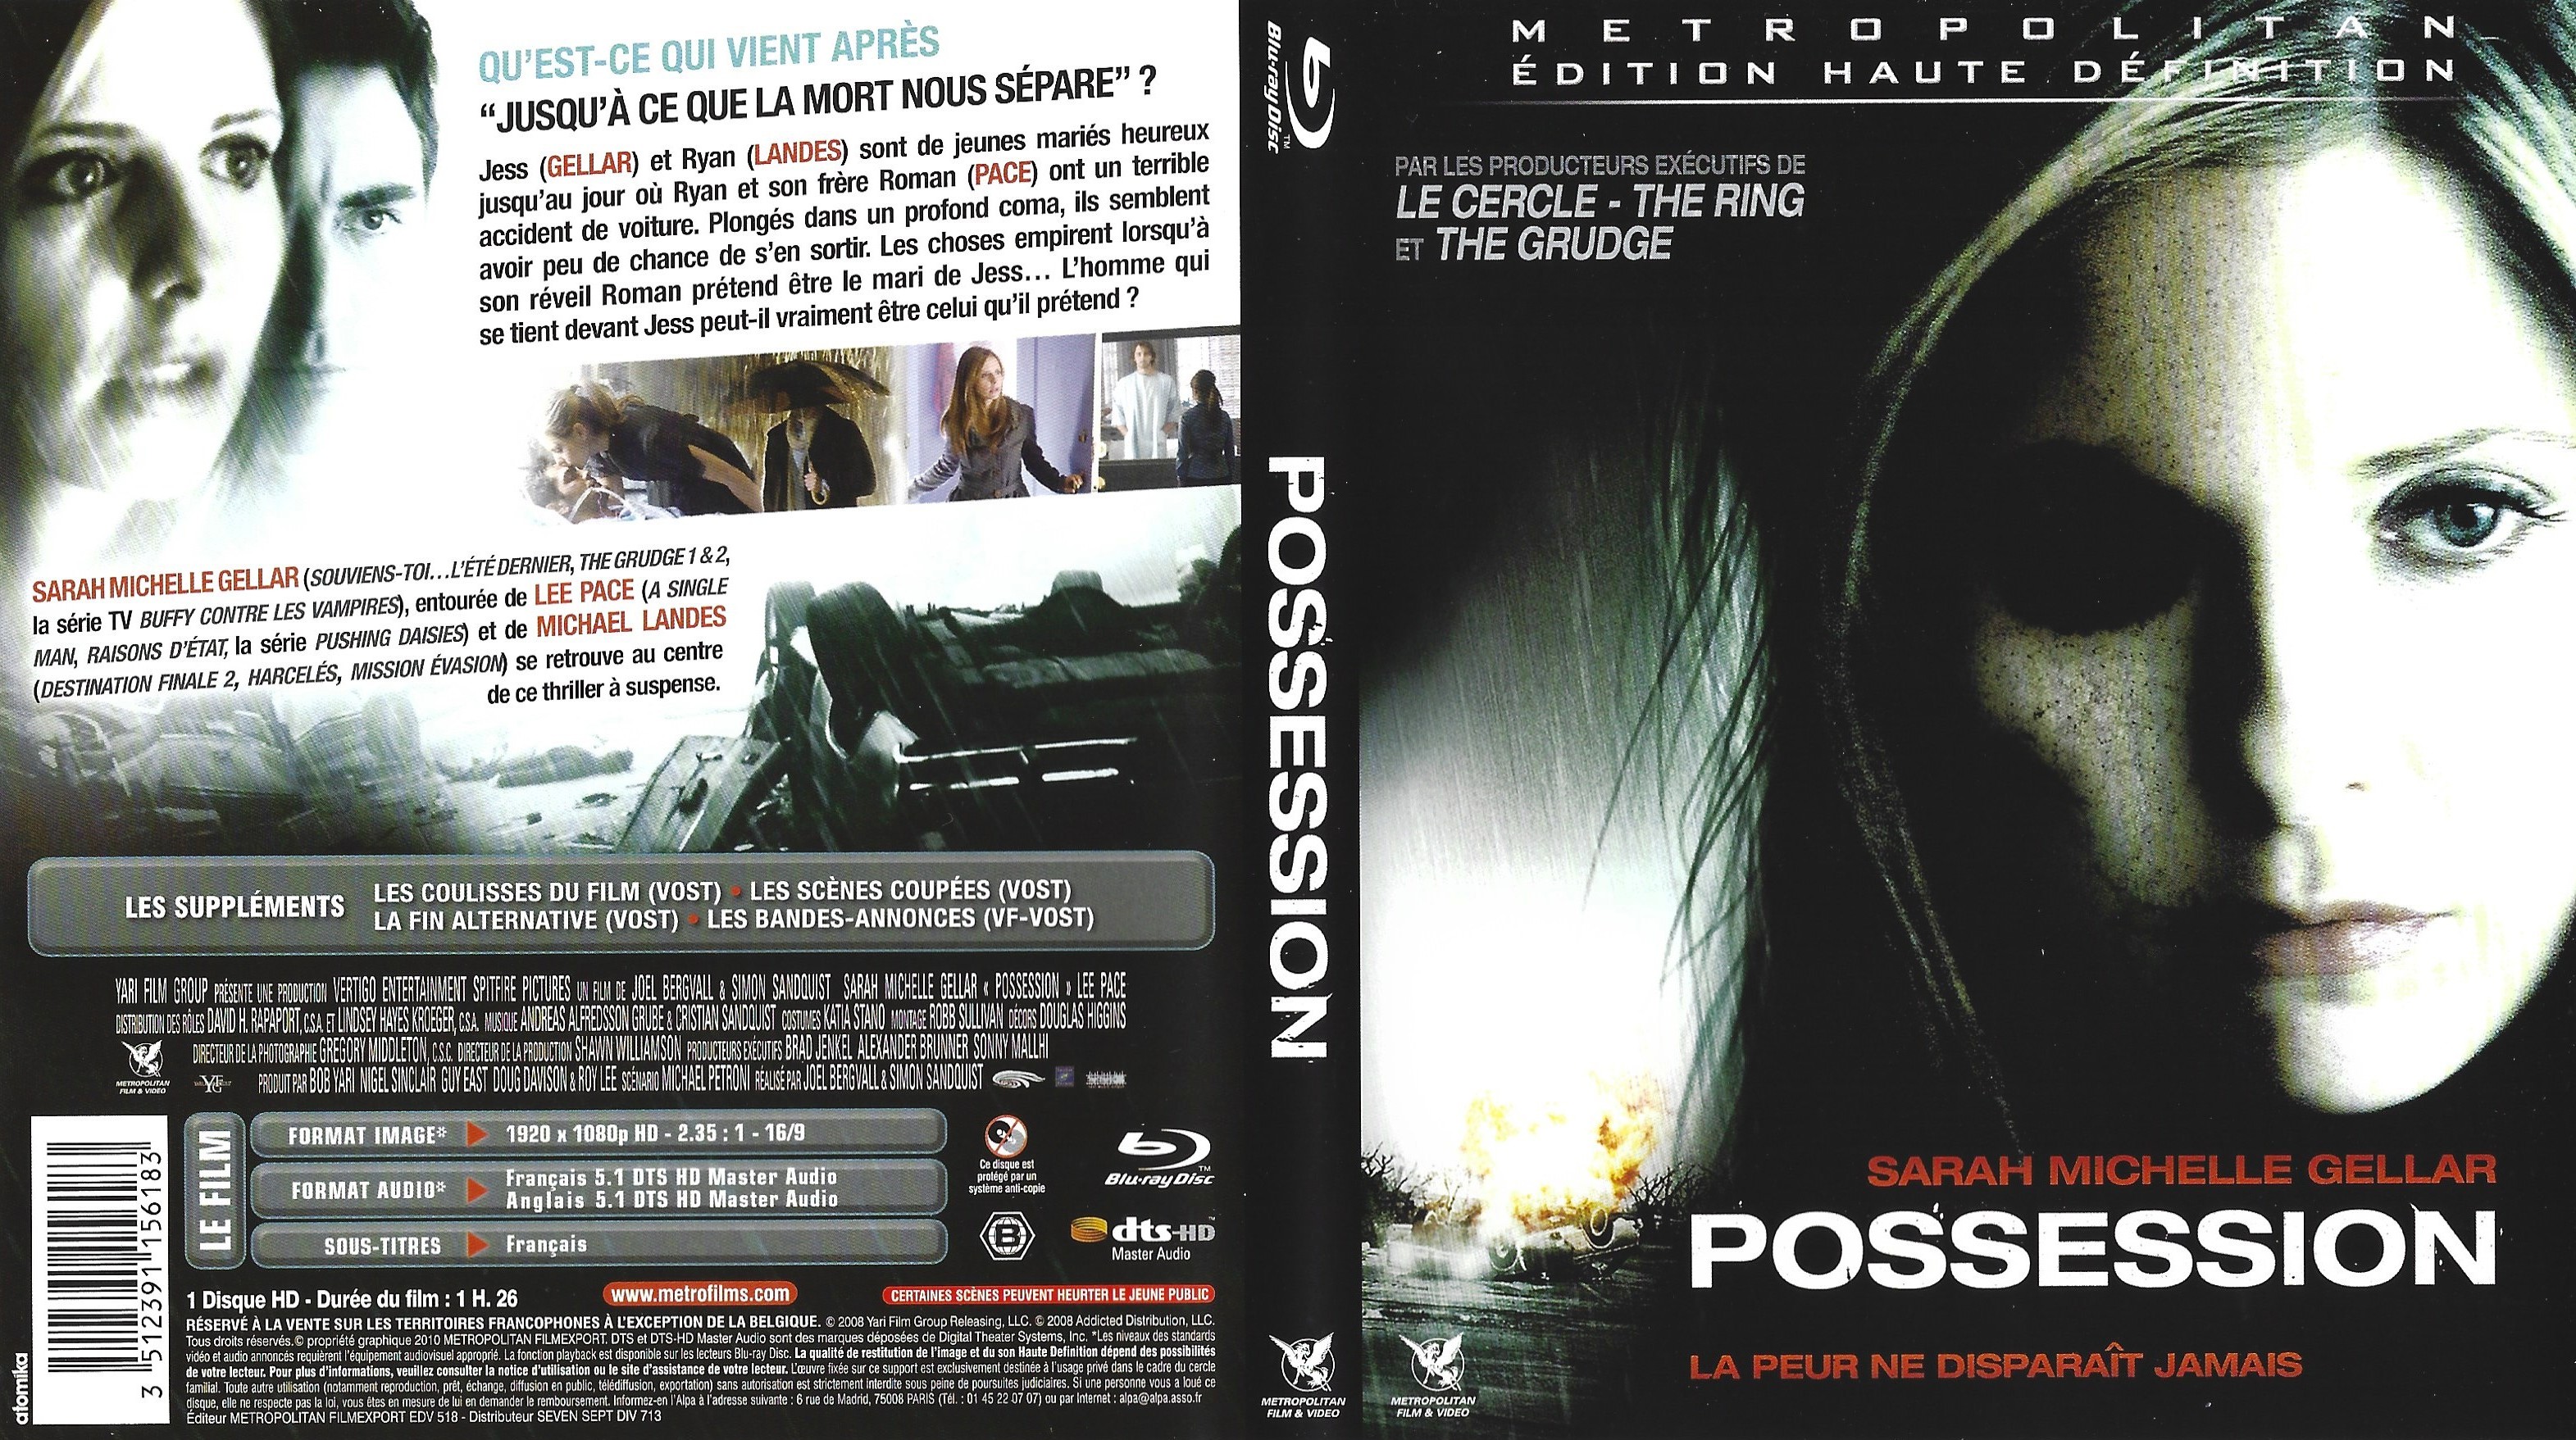 Jaquette DVD Possession 2010 (BLU-RAY)